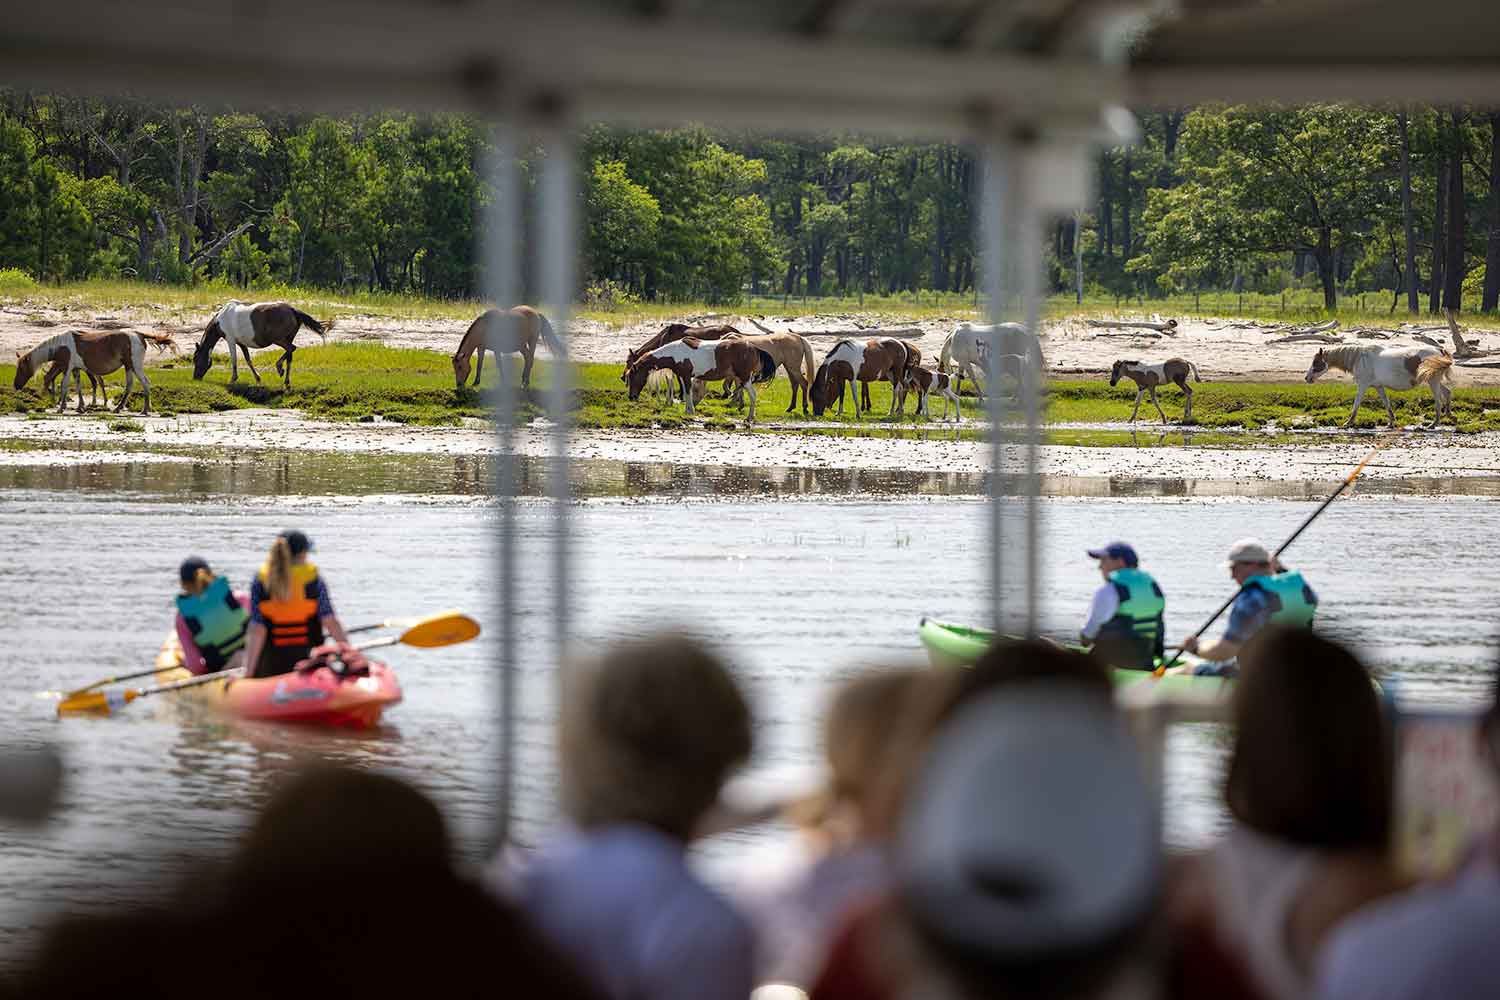 Visitors on vacation at Assateague in Virginia delight in the majesty of Wild Horses on this cruise and kayak tour.